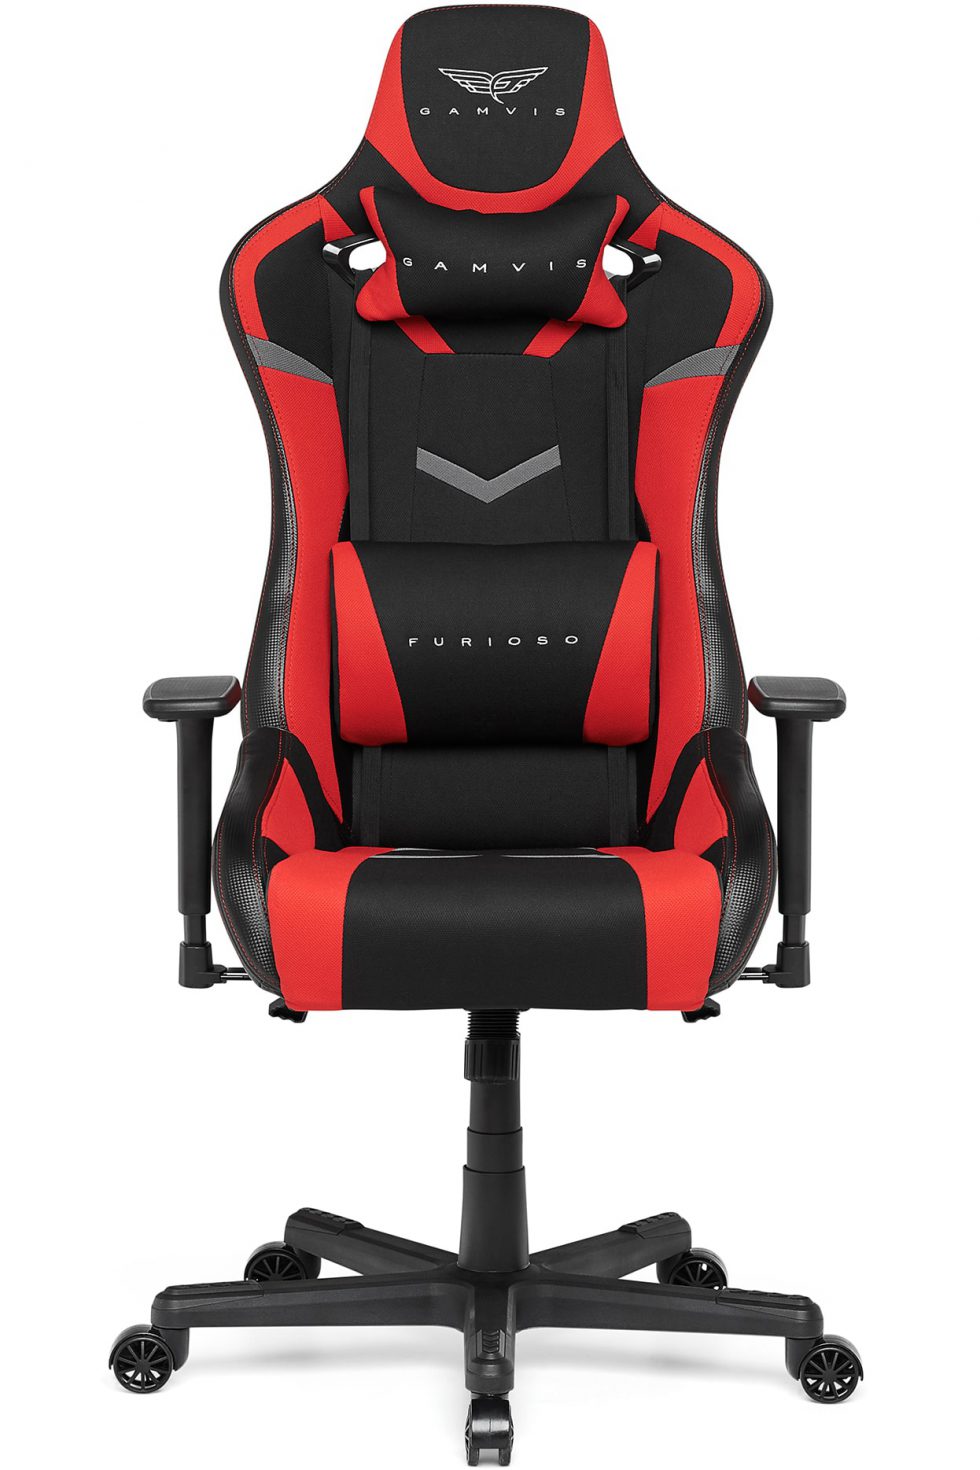 Gamvis Furioso Gaming Chair Black Red Fabric